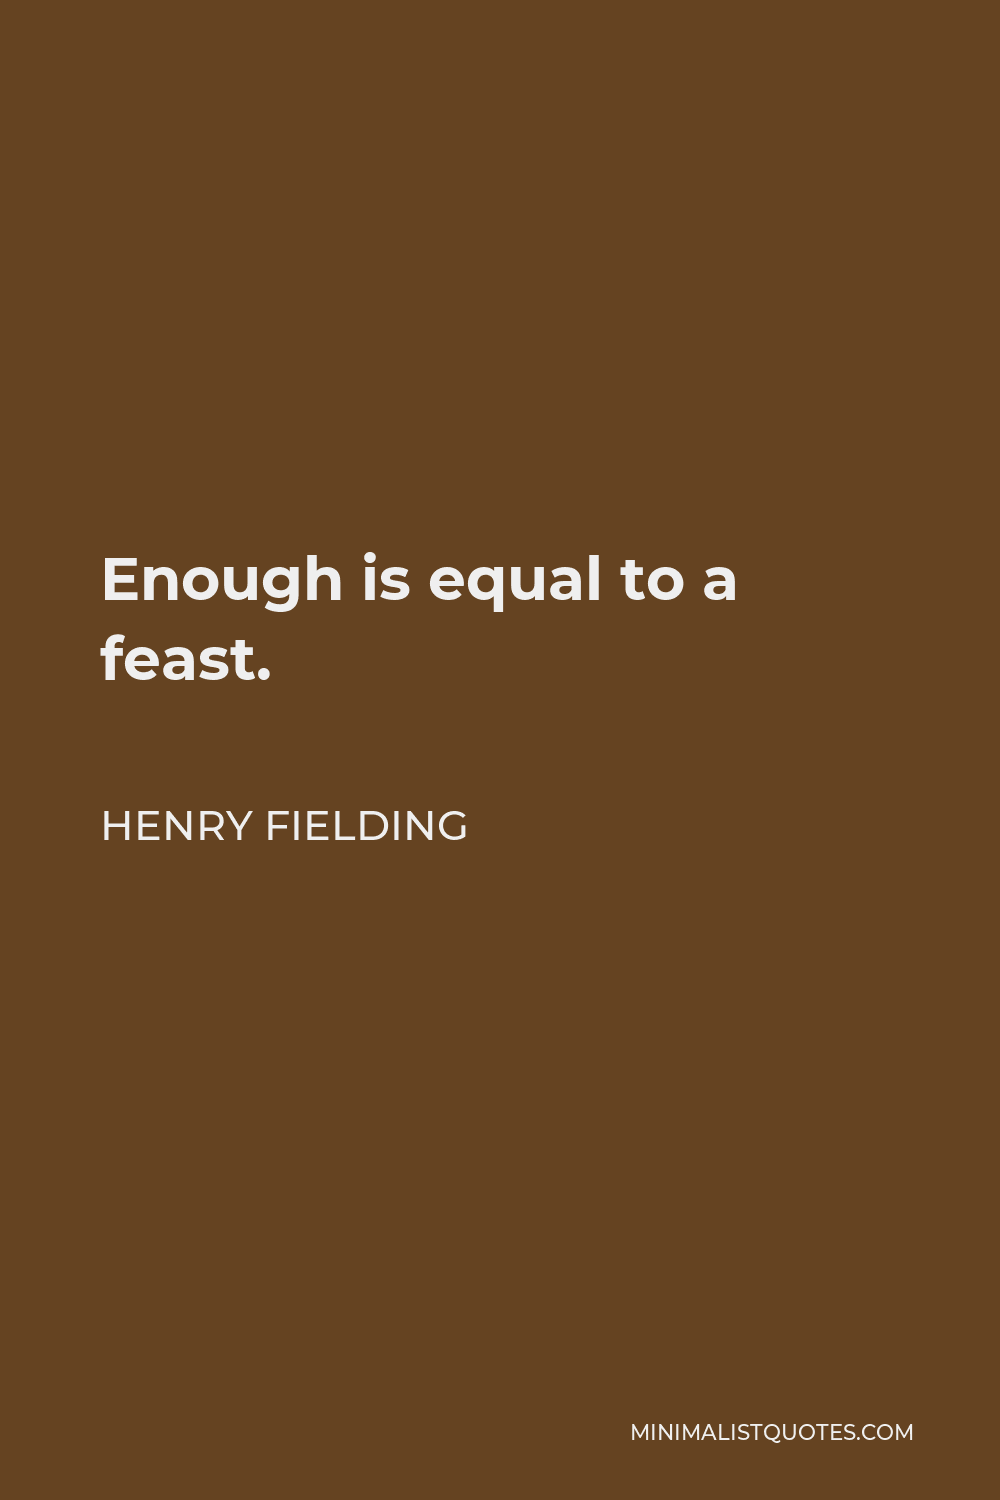 Henry Fielding Quote - Enough is equal to a feast.